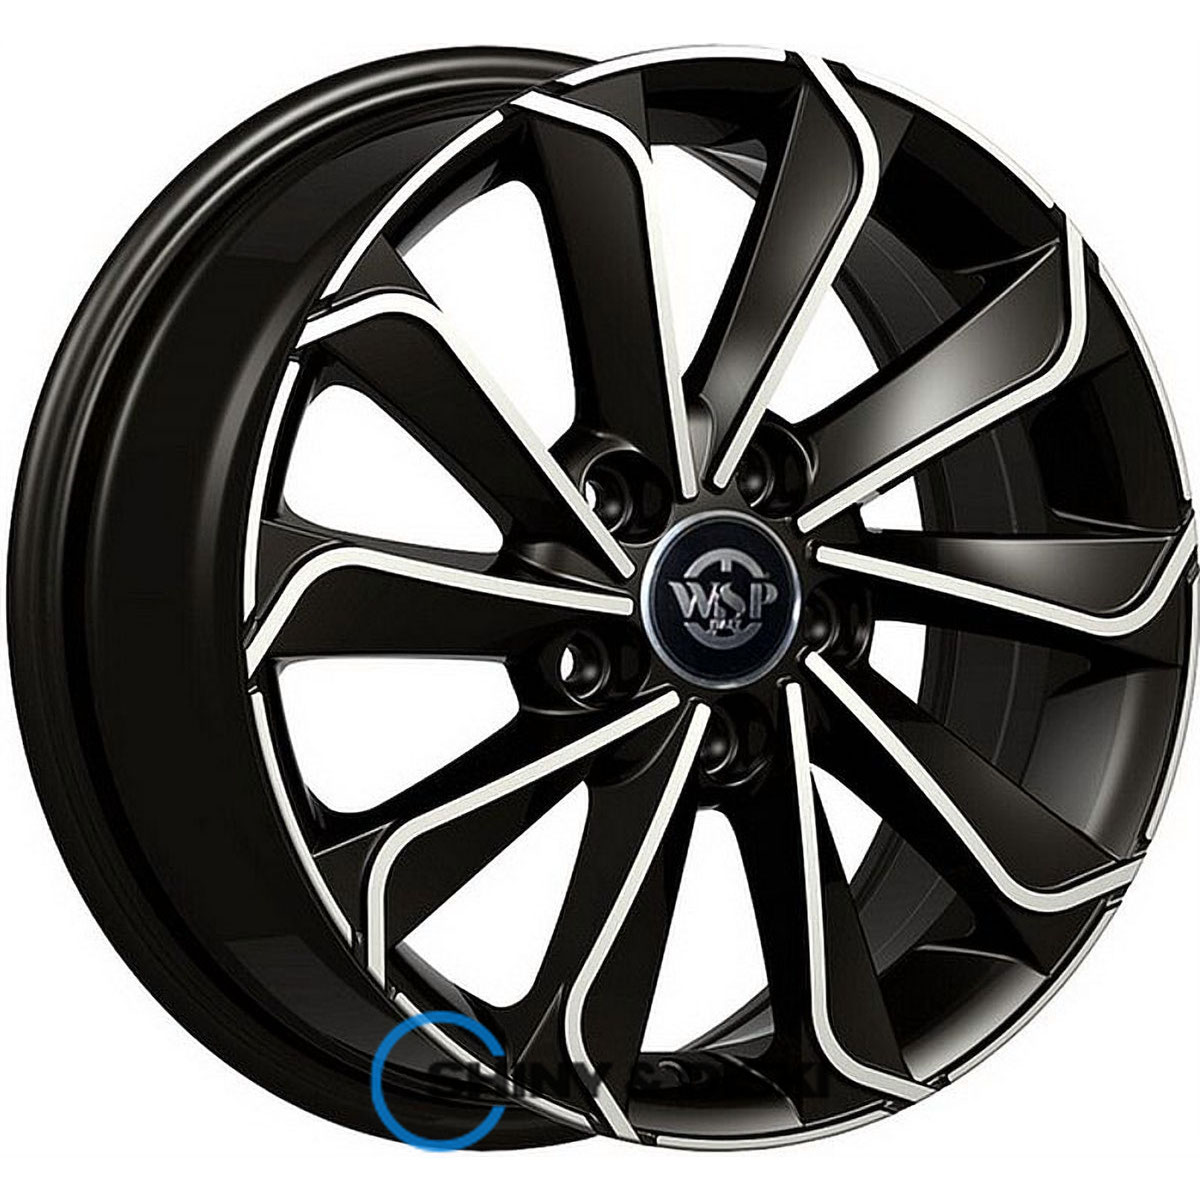 wsp italy volkswagen wd003 corinto glossy black polished r16 w6.5 pcd5x112 et41 dia57.1